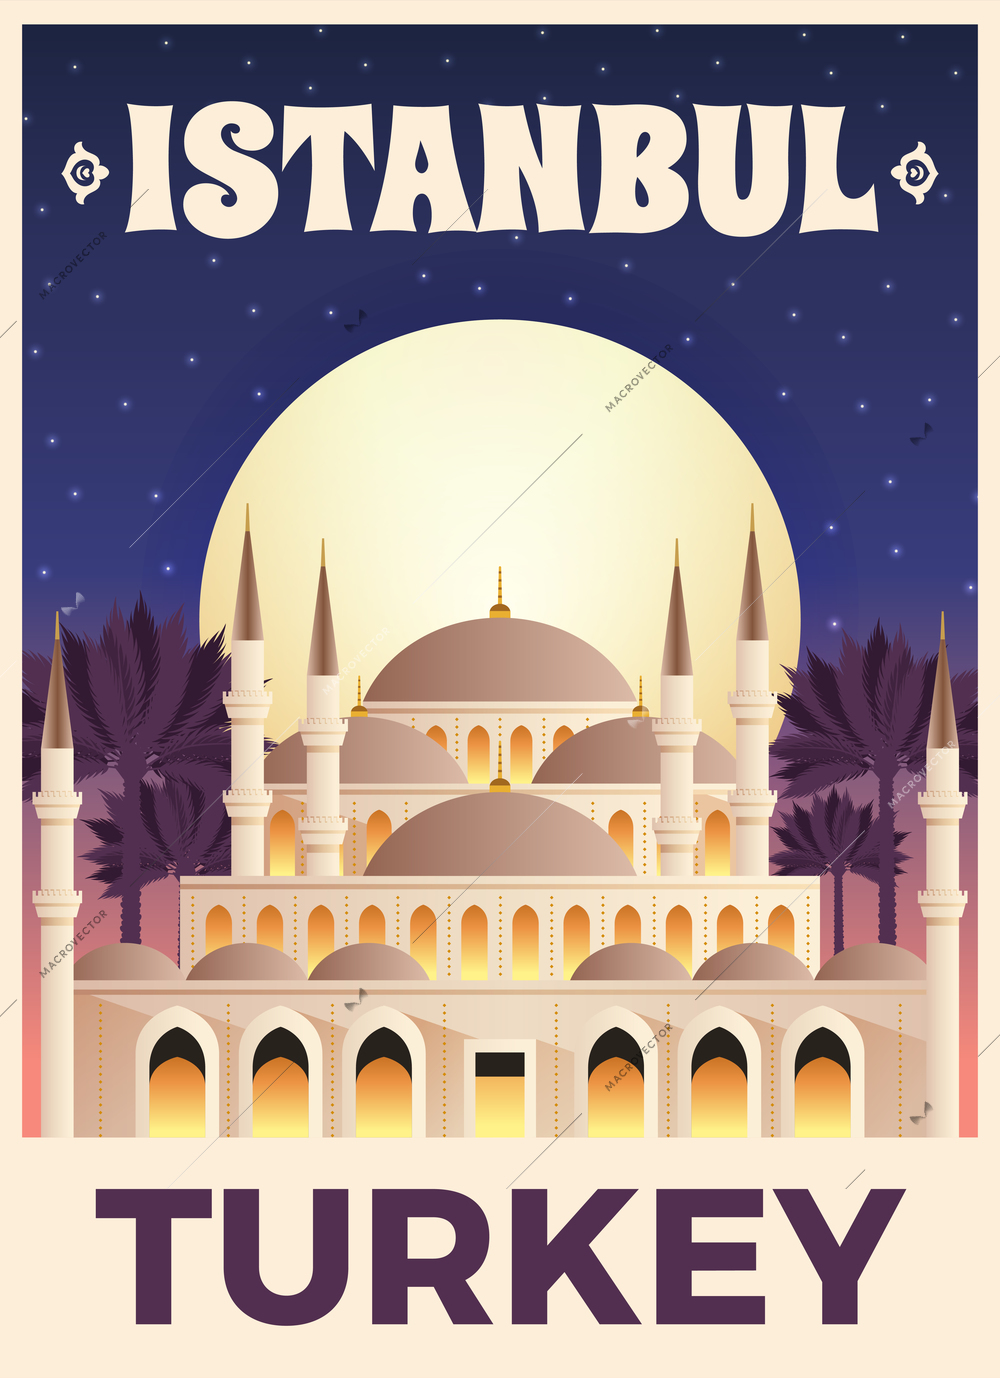 Turkey travel tourist top attractions flat poster with famous istanbul mosque minarets palms starry sky vector illustration